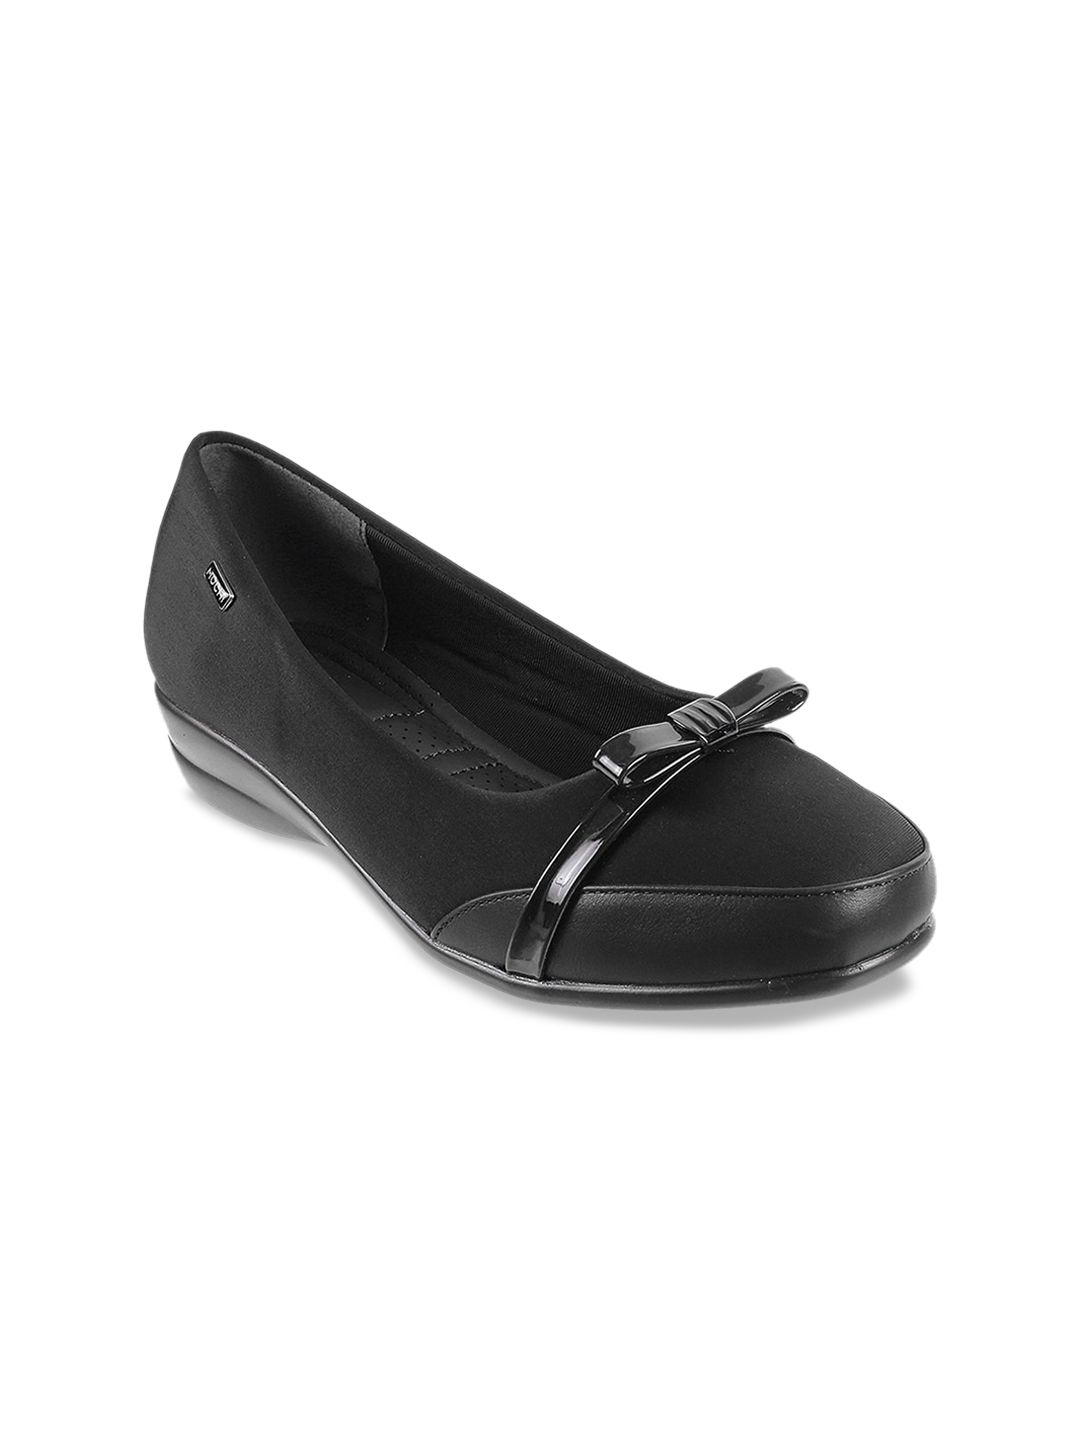 Mochi Women Black Embellished Wedge Pumps with Bows Price in India